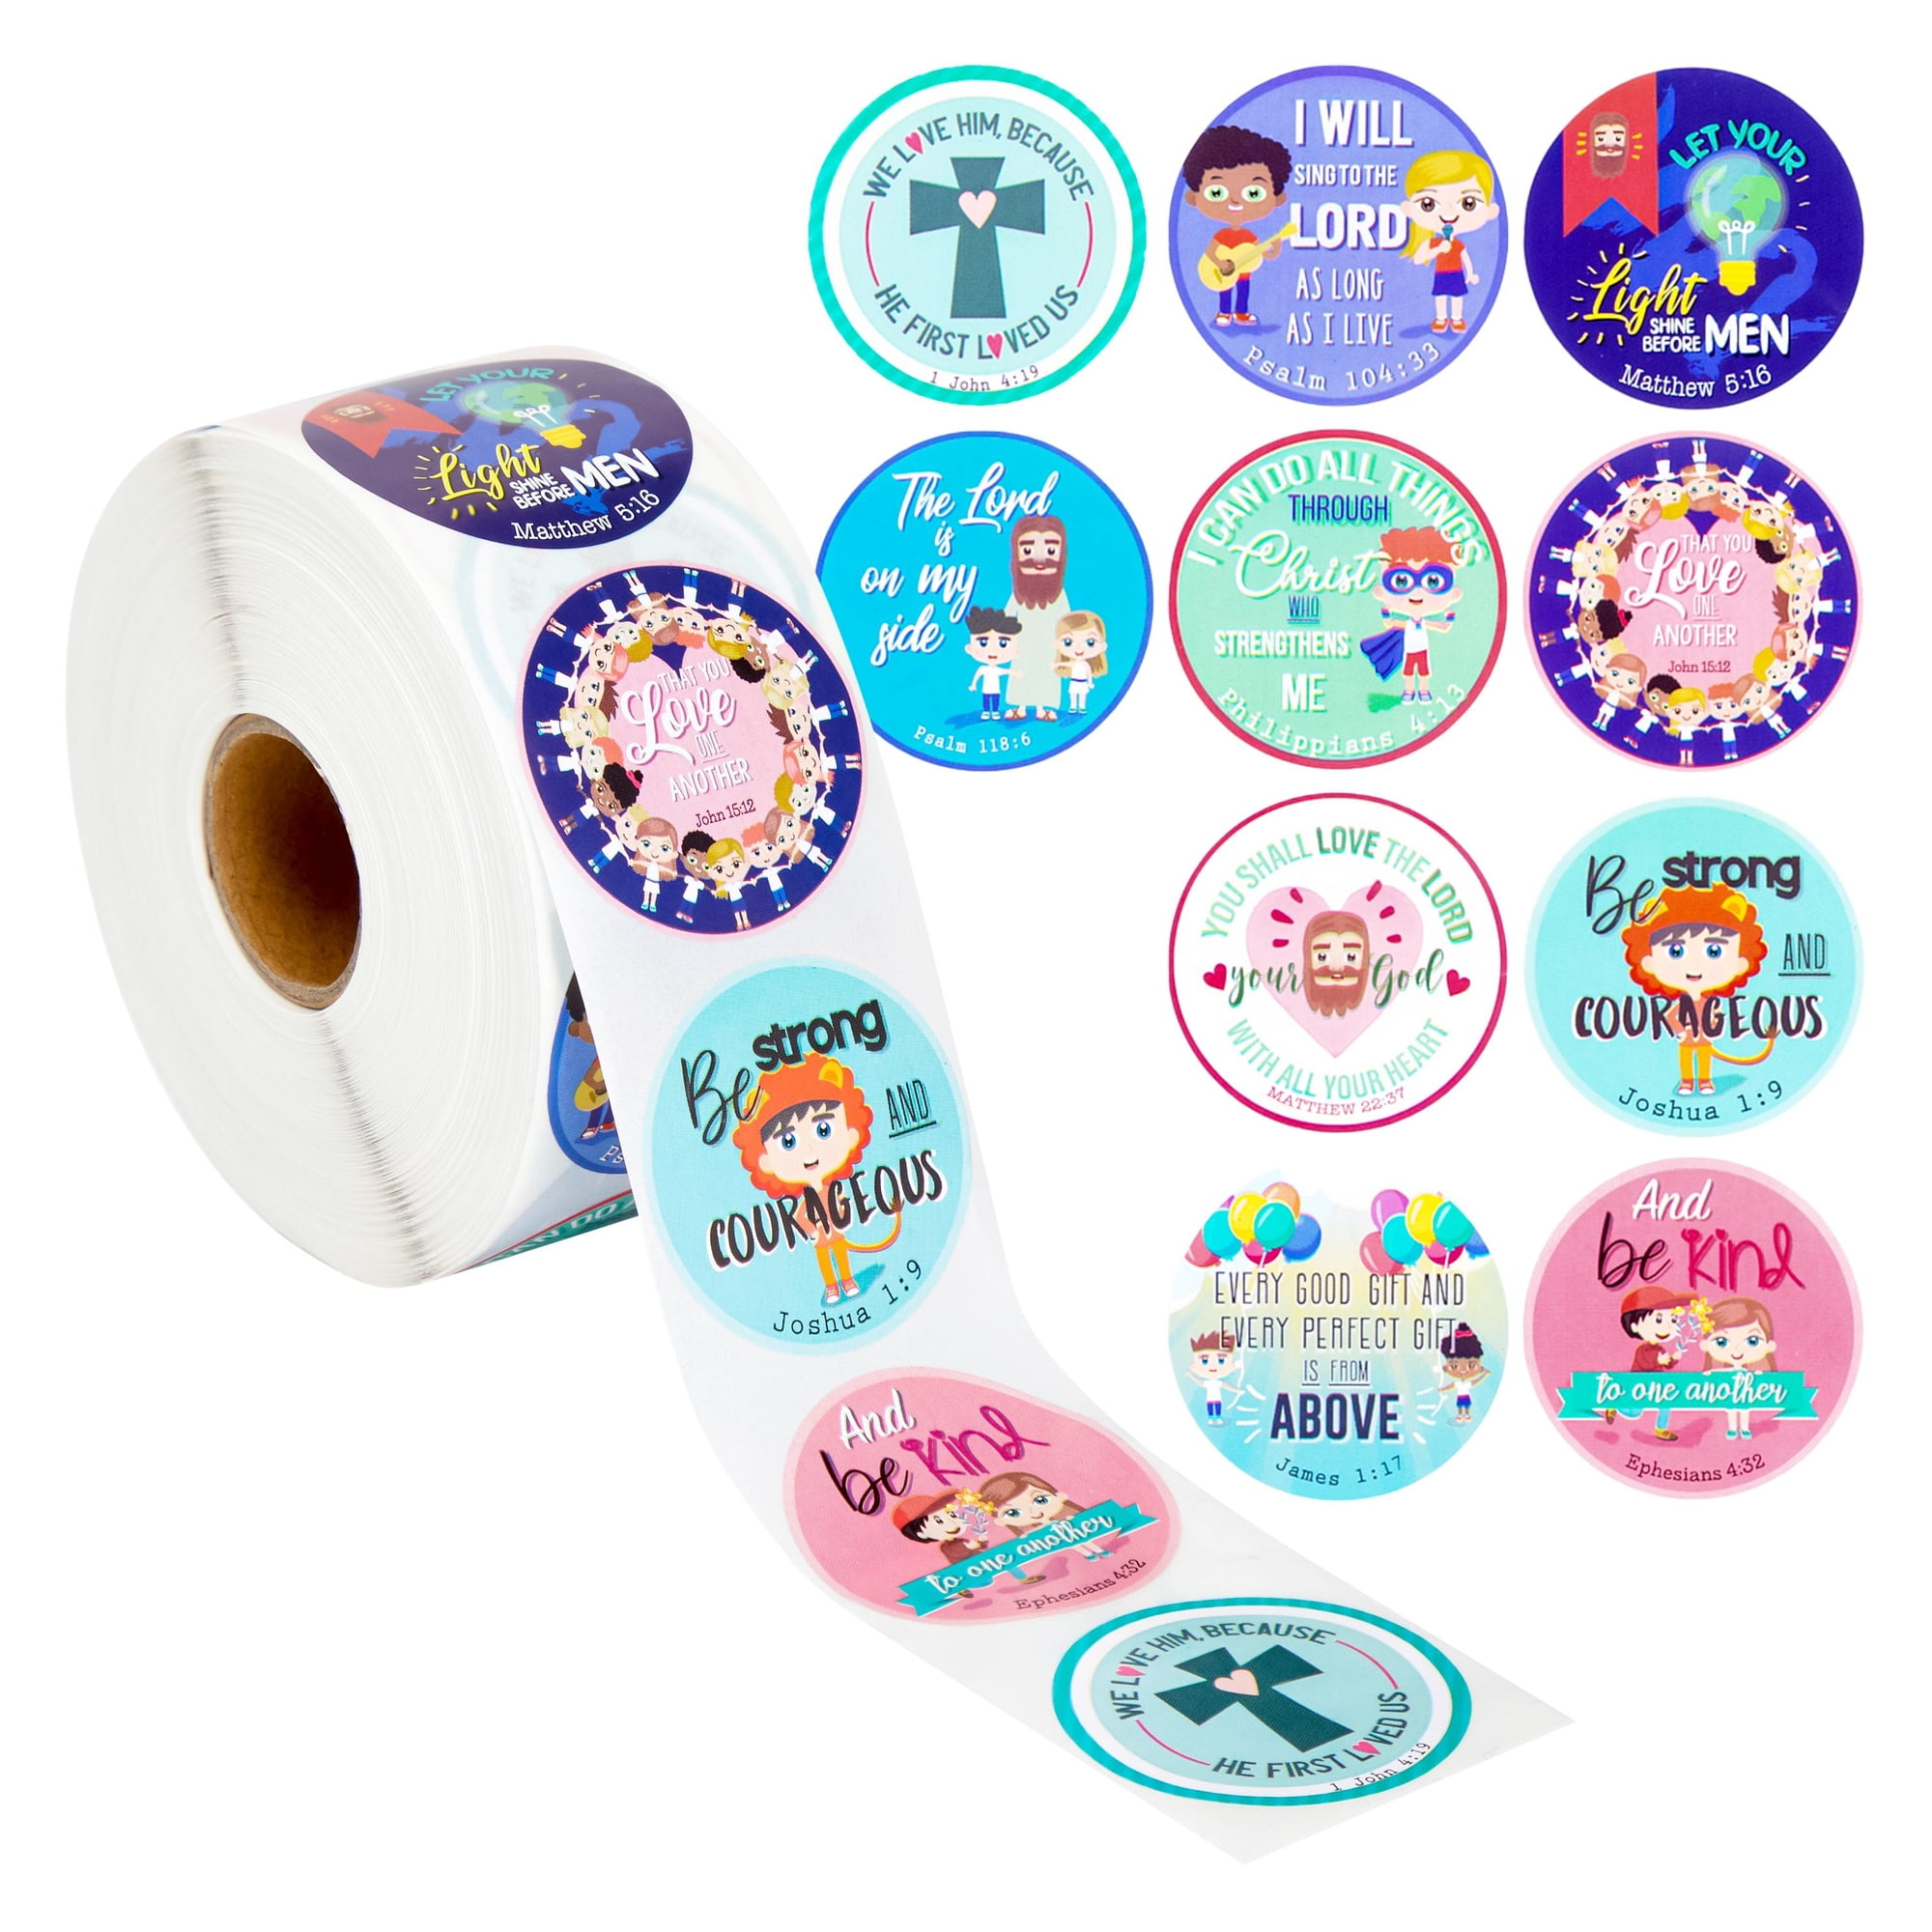 Round Christian Bible Verse Stickers for Kids (2 in, 500 Pieces)